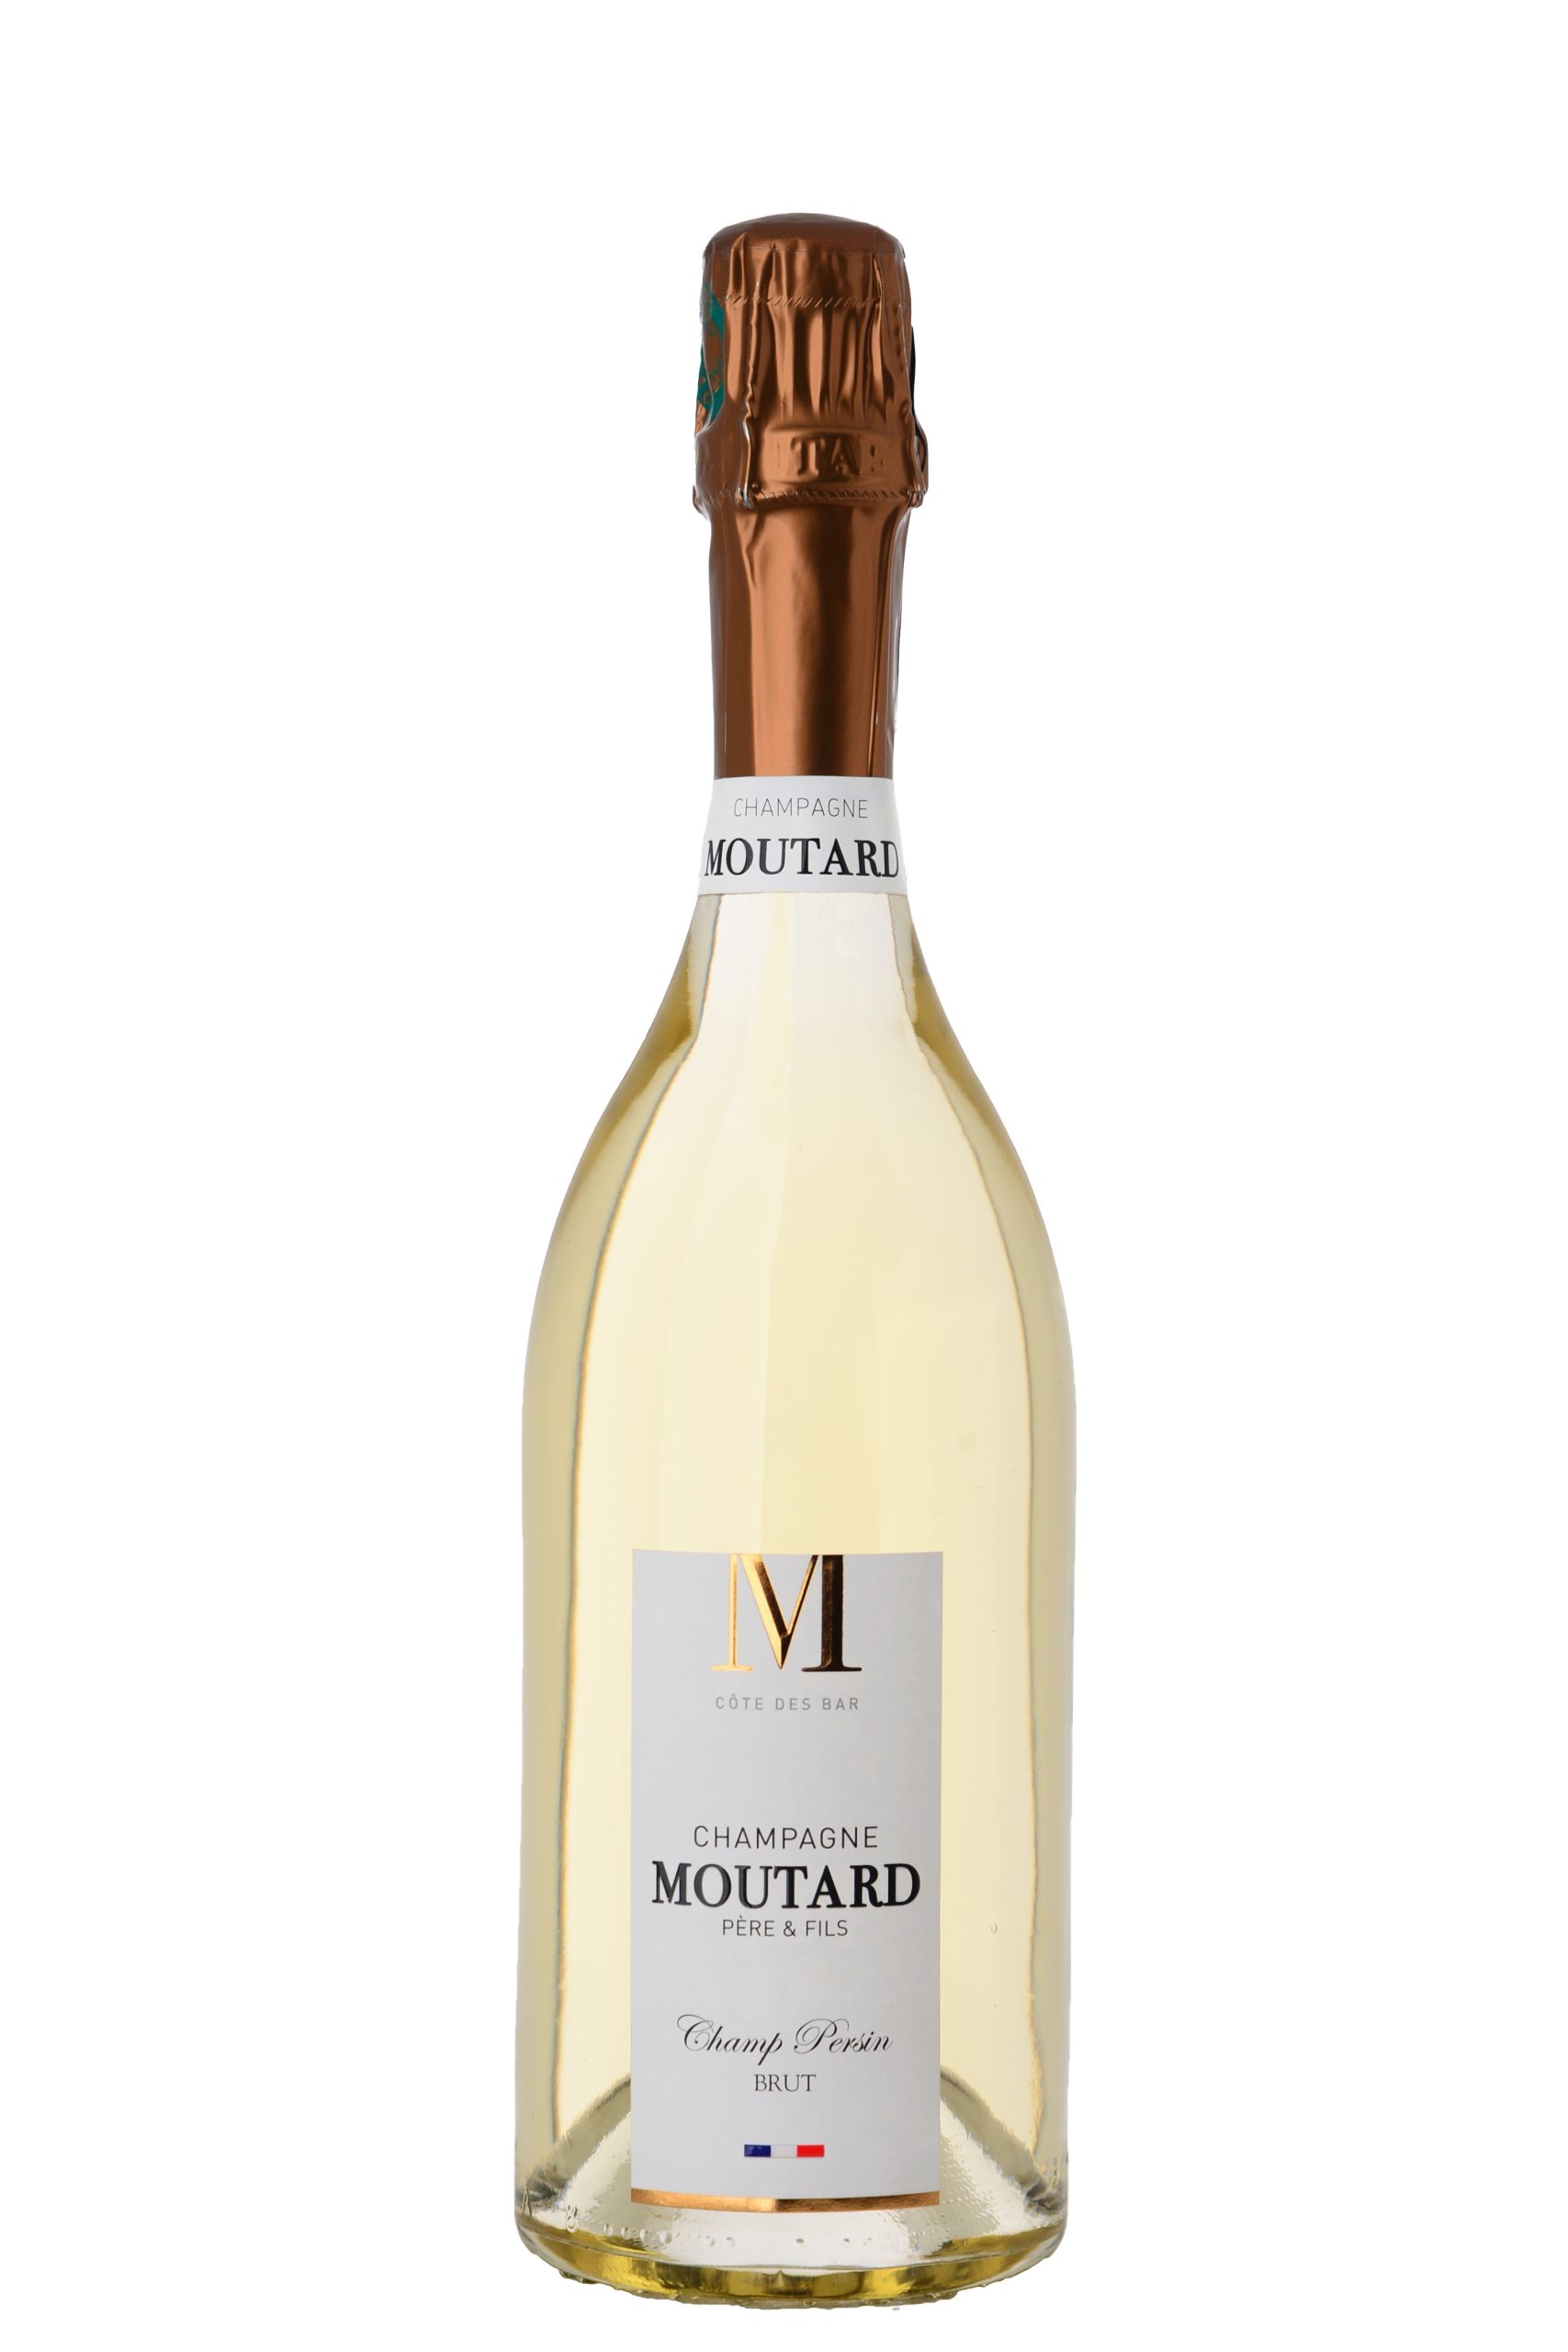 MOUTARD BRUT CHAMP PERSIN